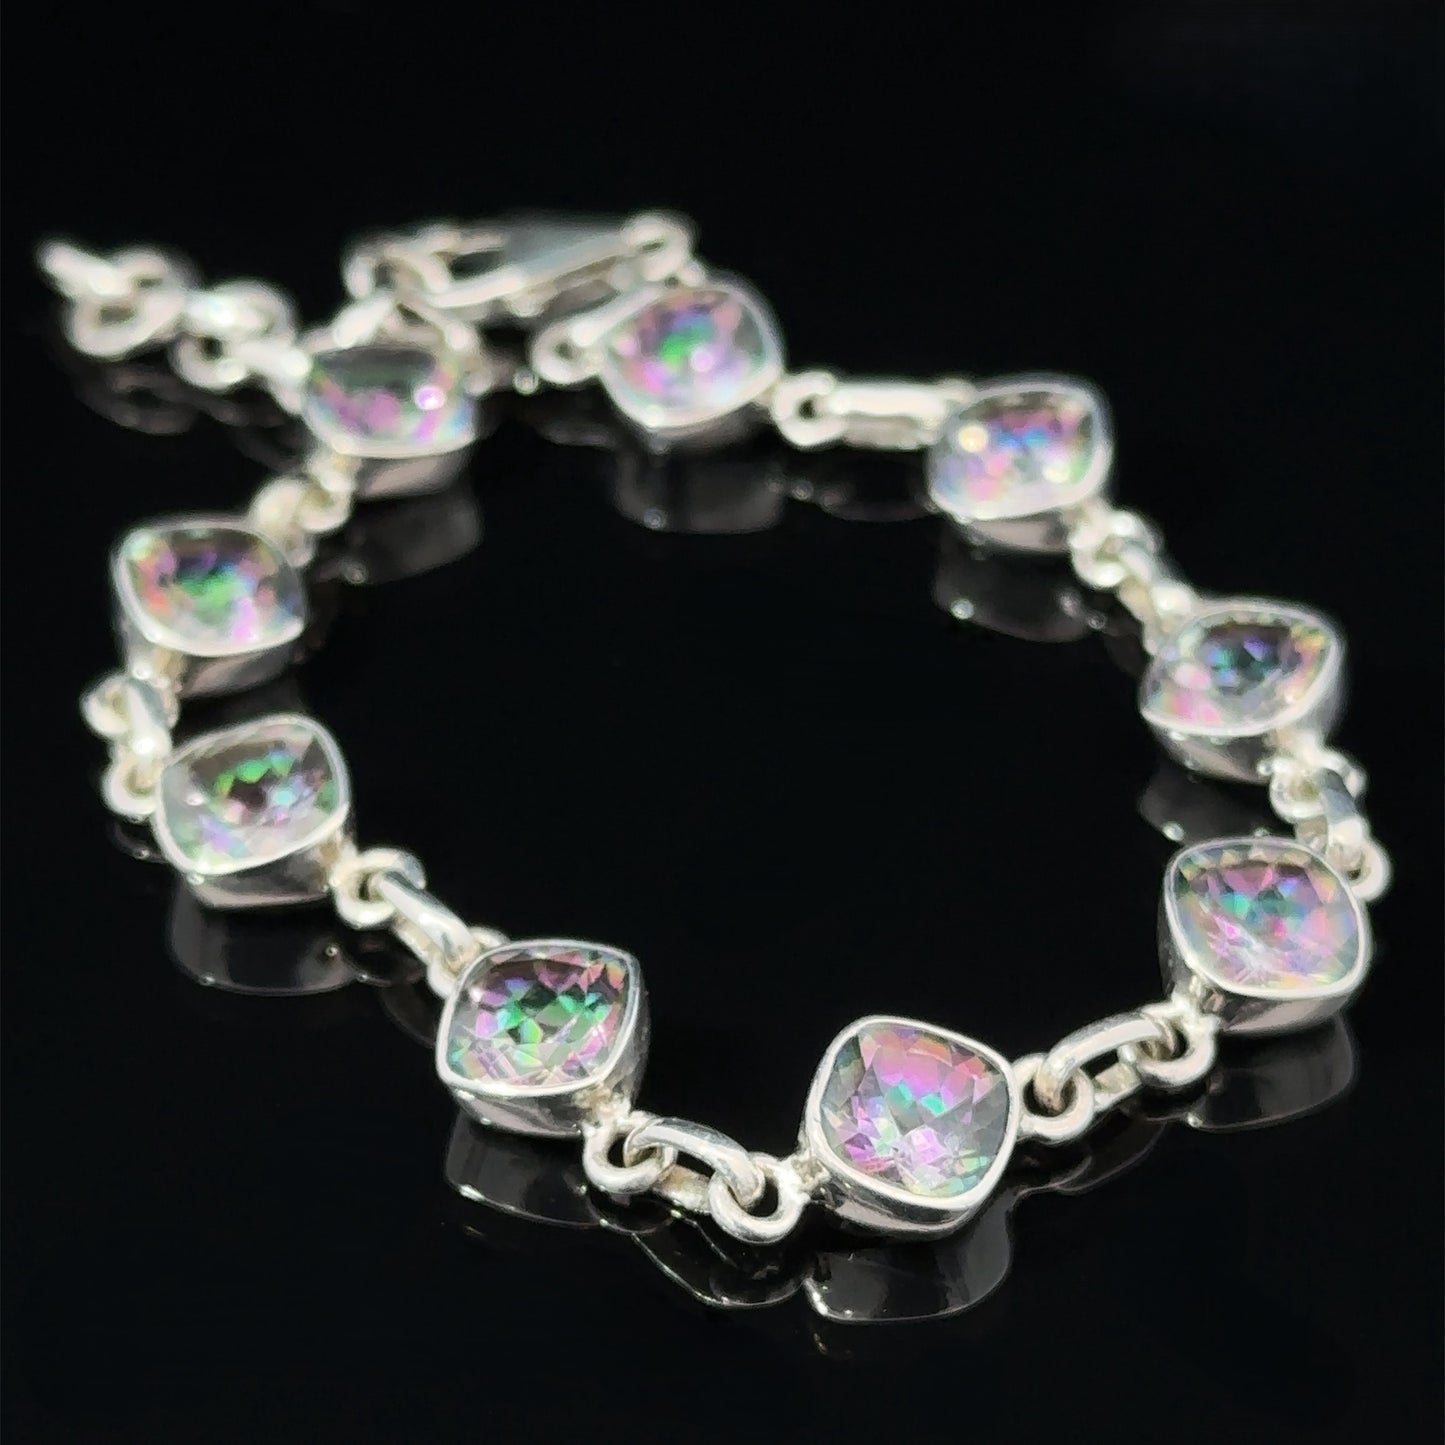 
                  
                    A Rainbow Mystic Topaz Diamond Link Bracelet with iridescent, multifaceted Mystic Topaz stones arranged in a diamond link pattern against a black background.
                  
                